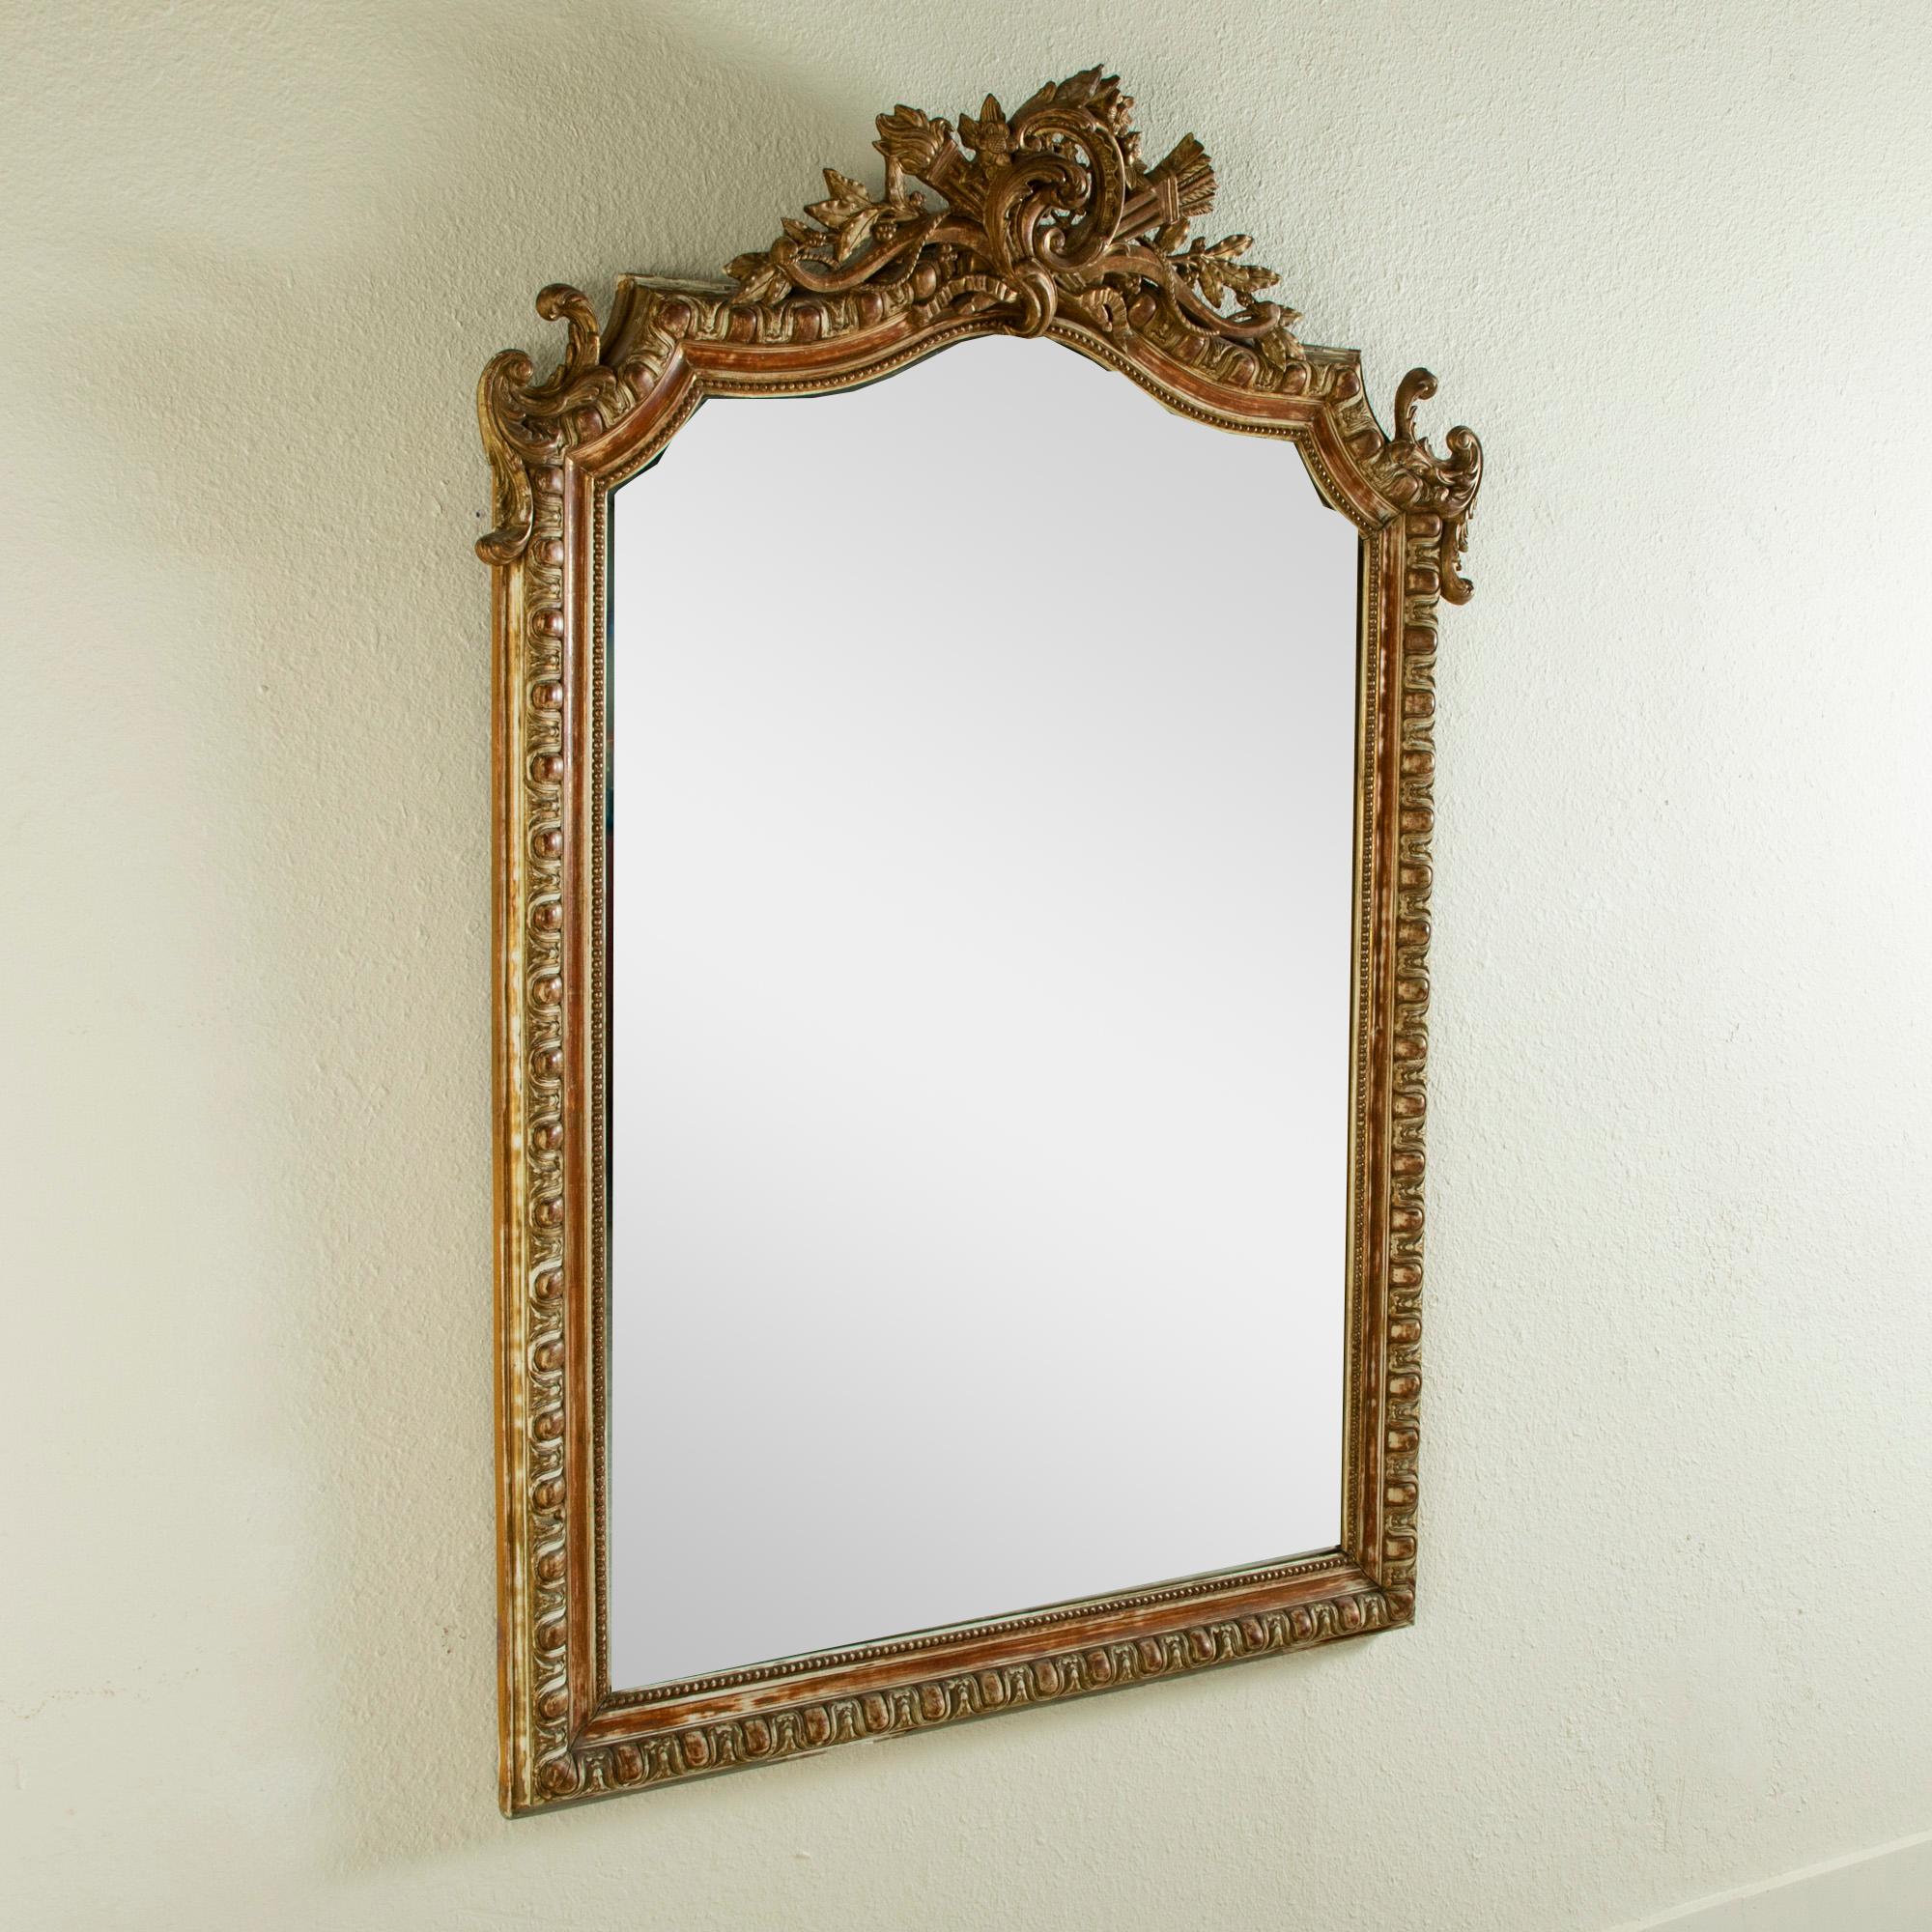 Mercury Glass Late 19th Century French Regency Style Gilt Wood Mirror with Beveled Glass For Sale